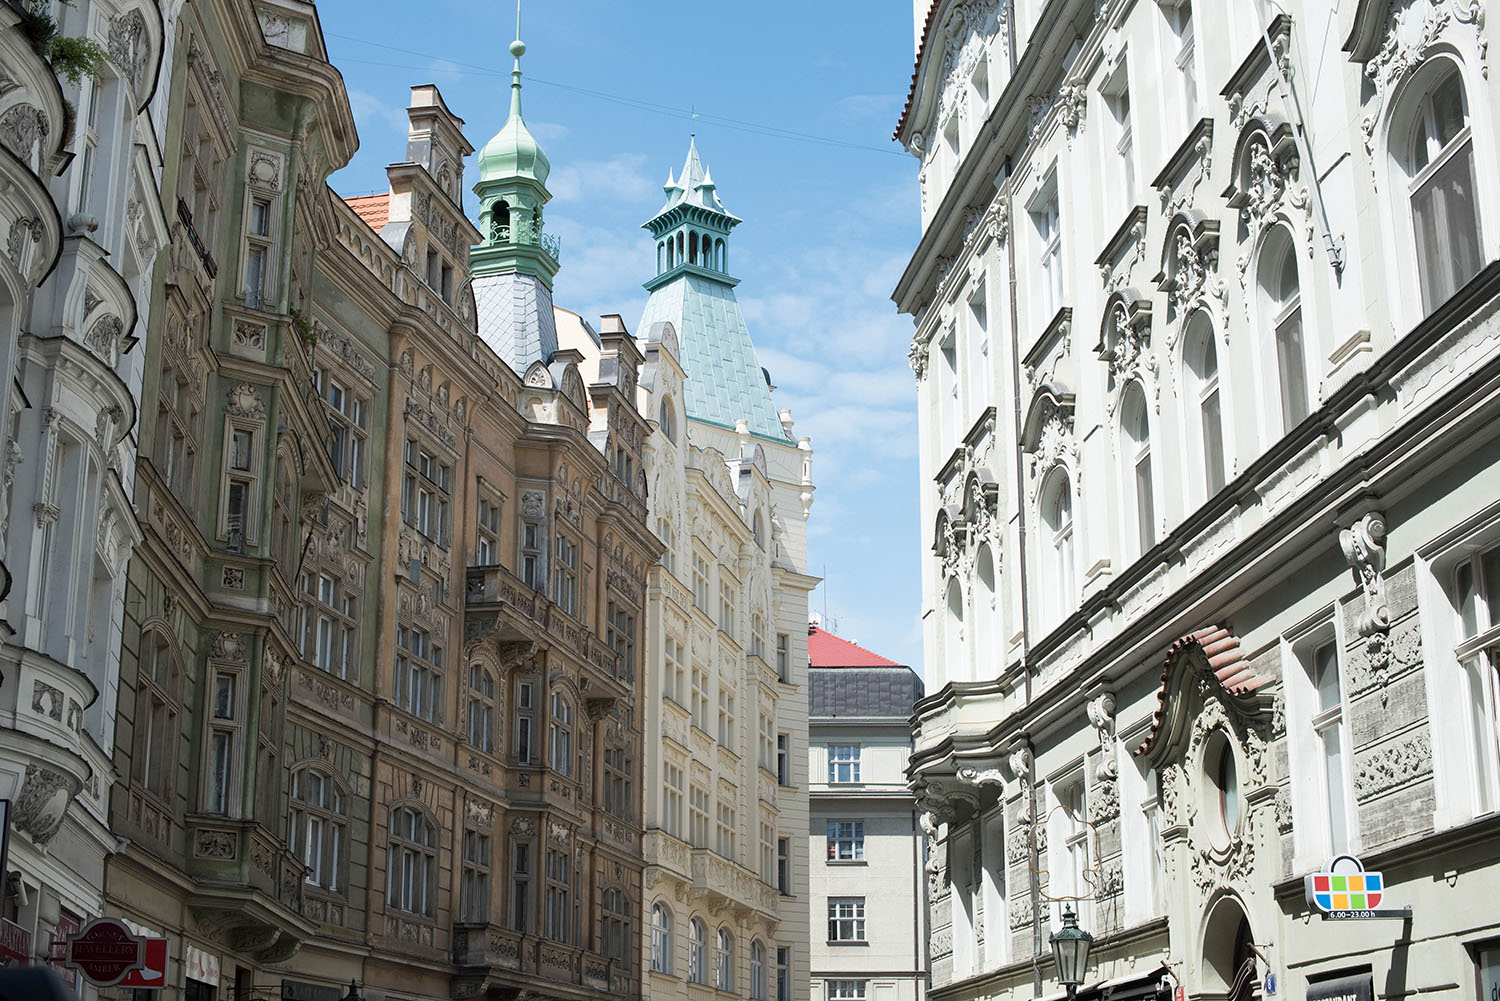 Pastel buildings near Old Town Square in Prague, as photographed by travel blogger Cee Fardoe of Coco & Vera